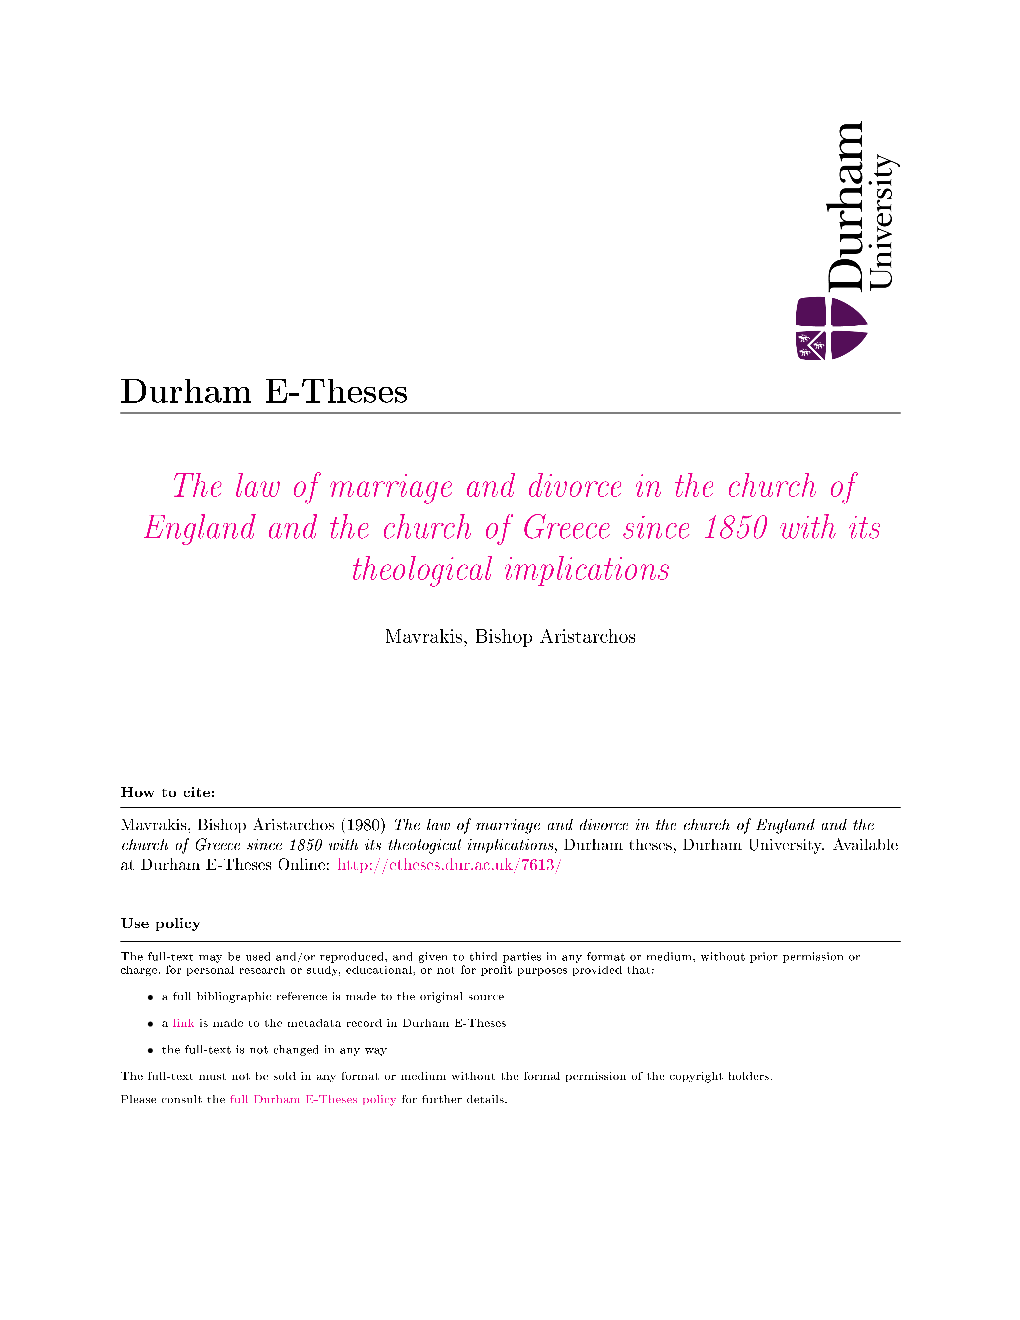 The Law of Marriage and Divorce in the Church of England and the Church of Greece Since 1850 with Its Theological Implications